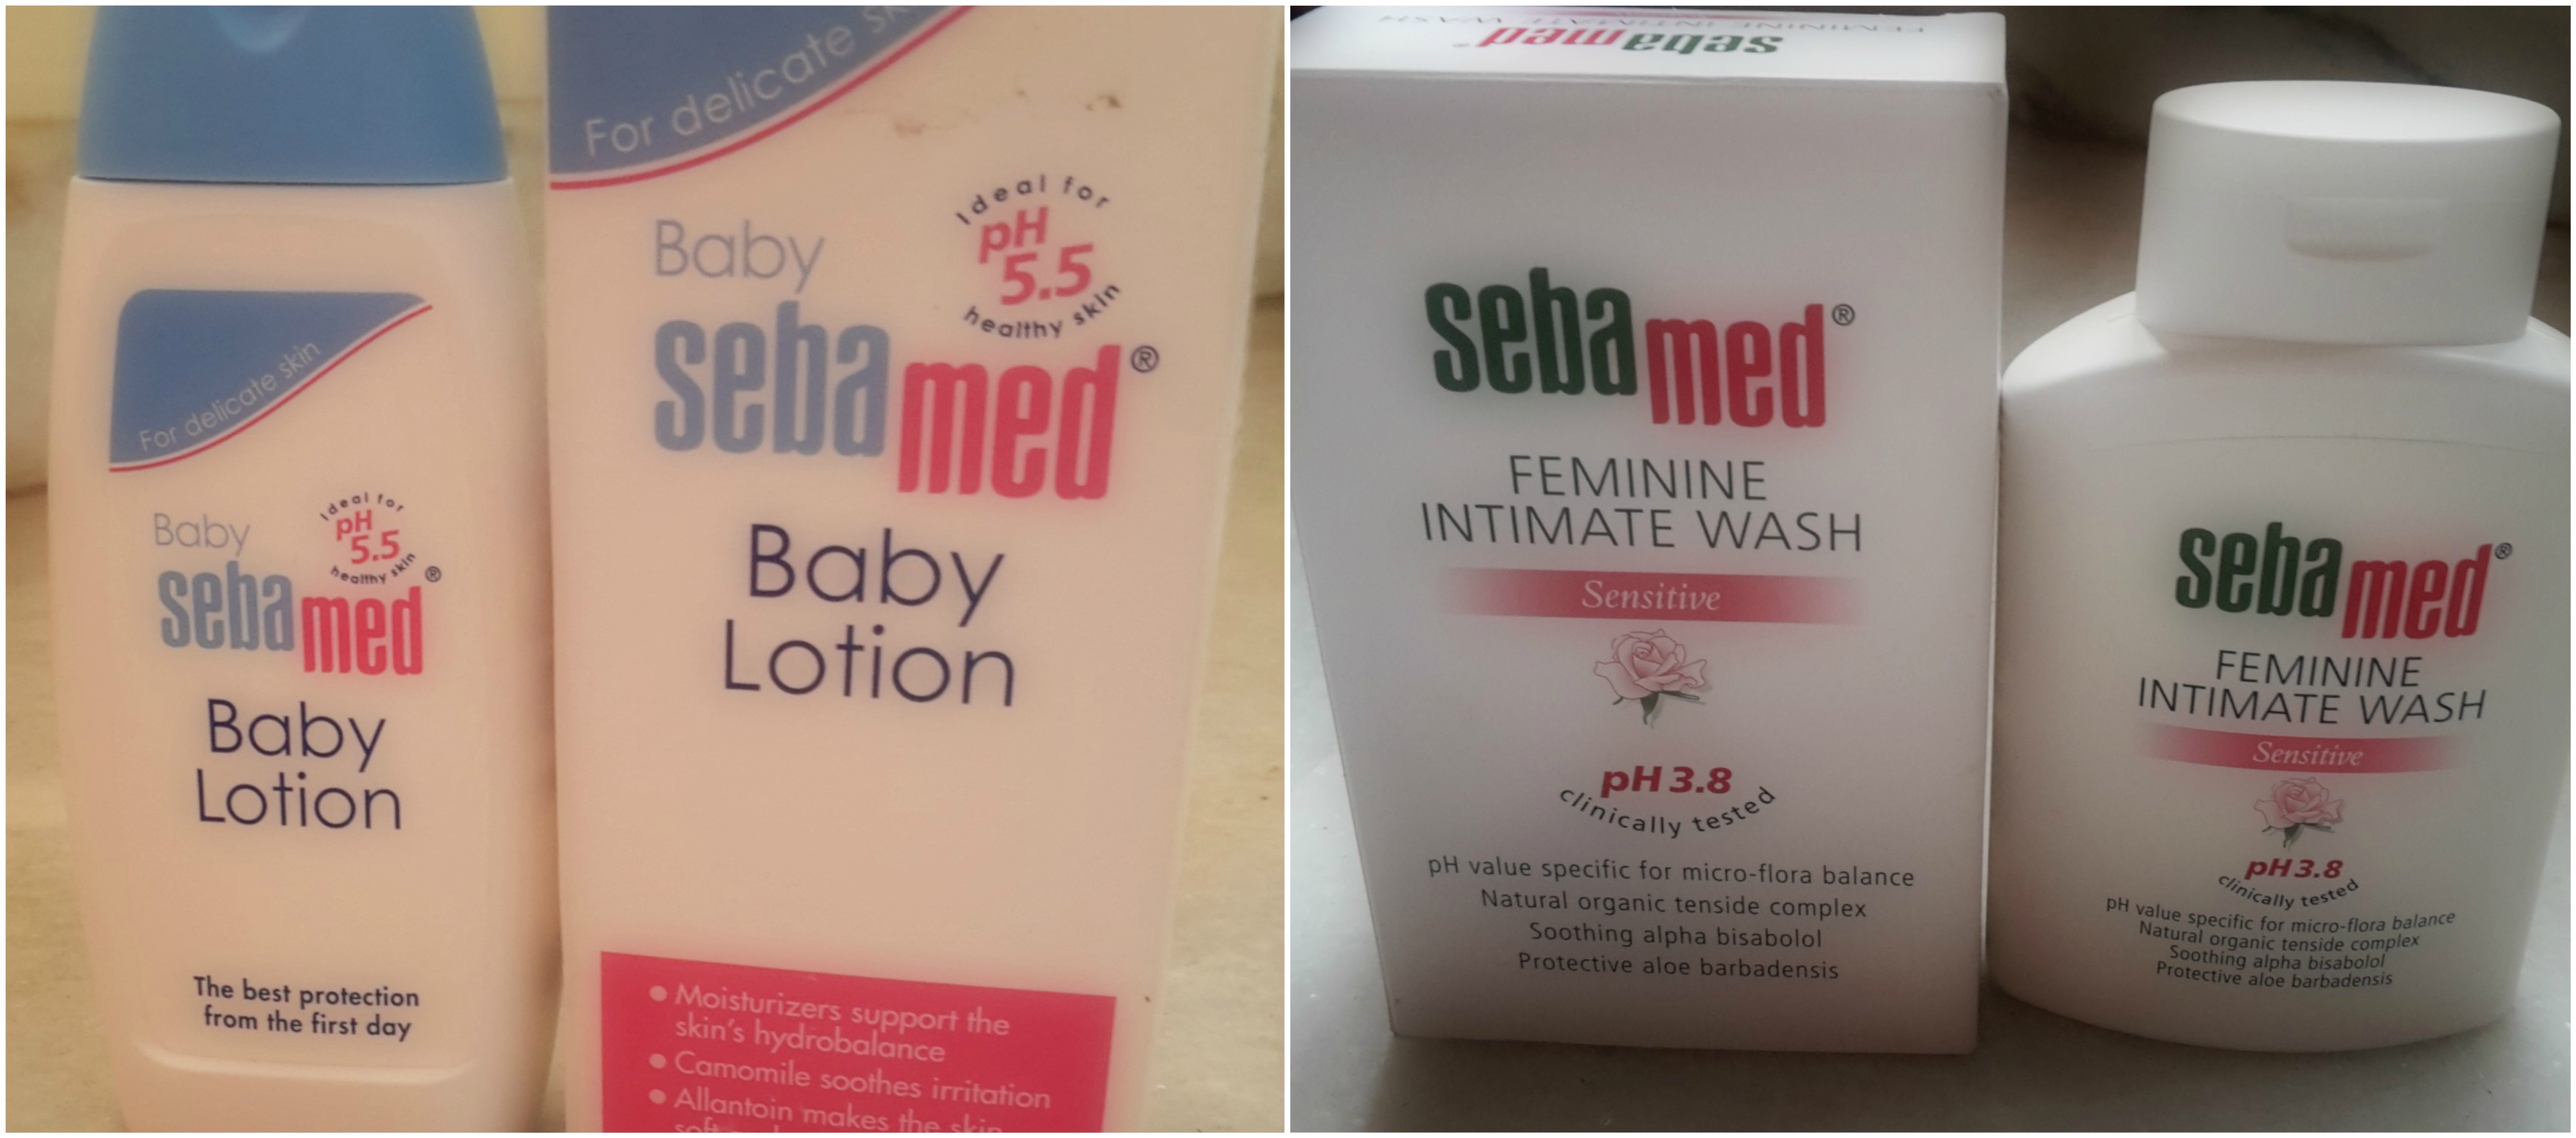 sebamed products for newborn baby